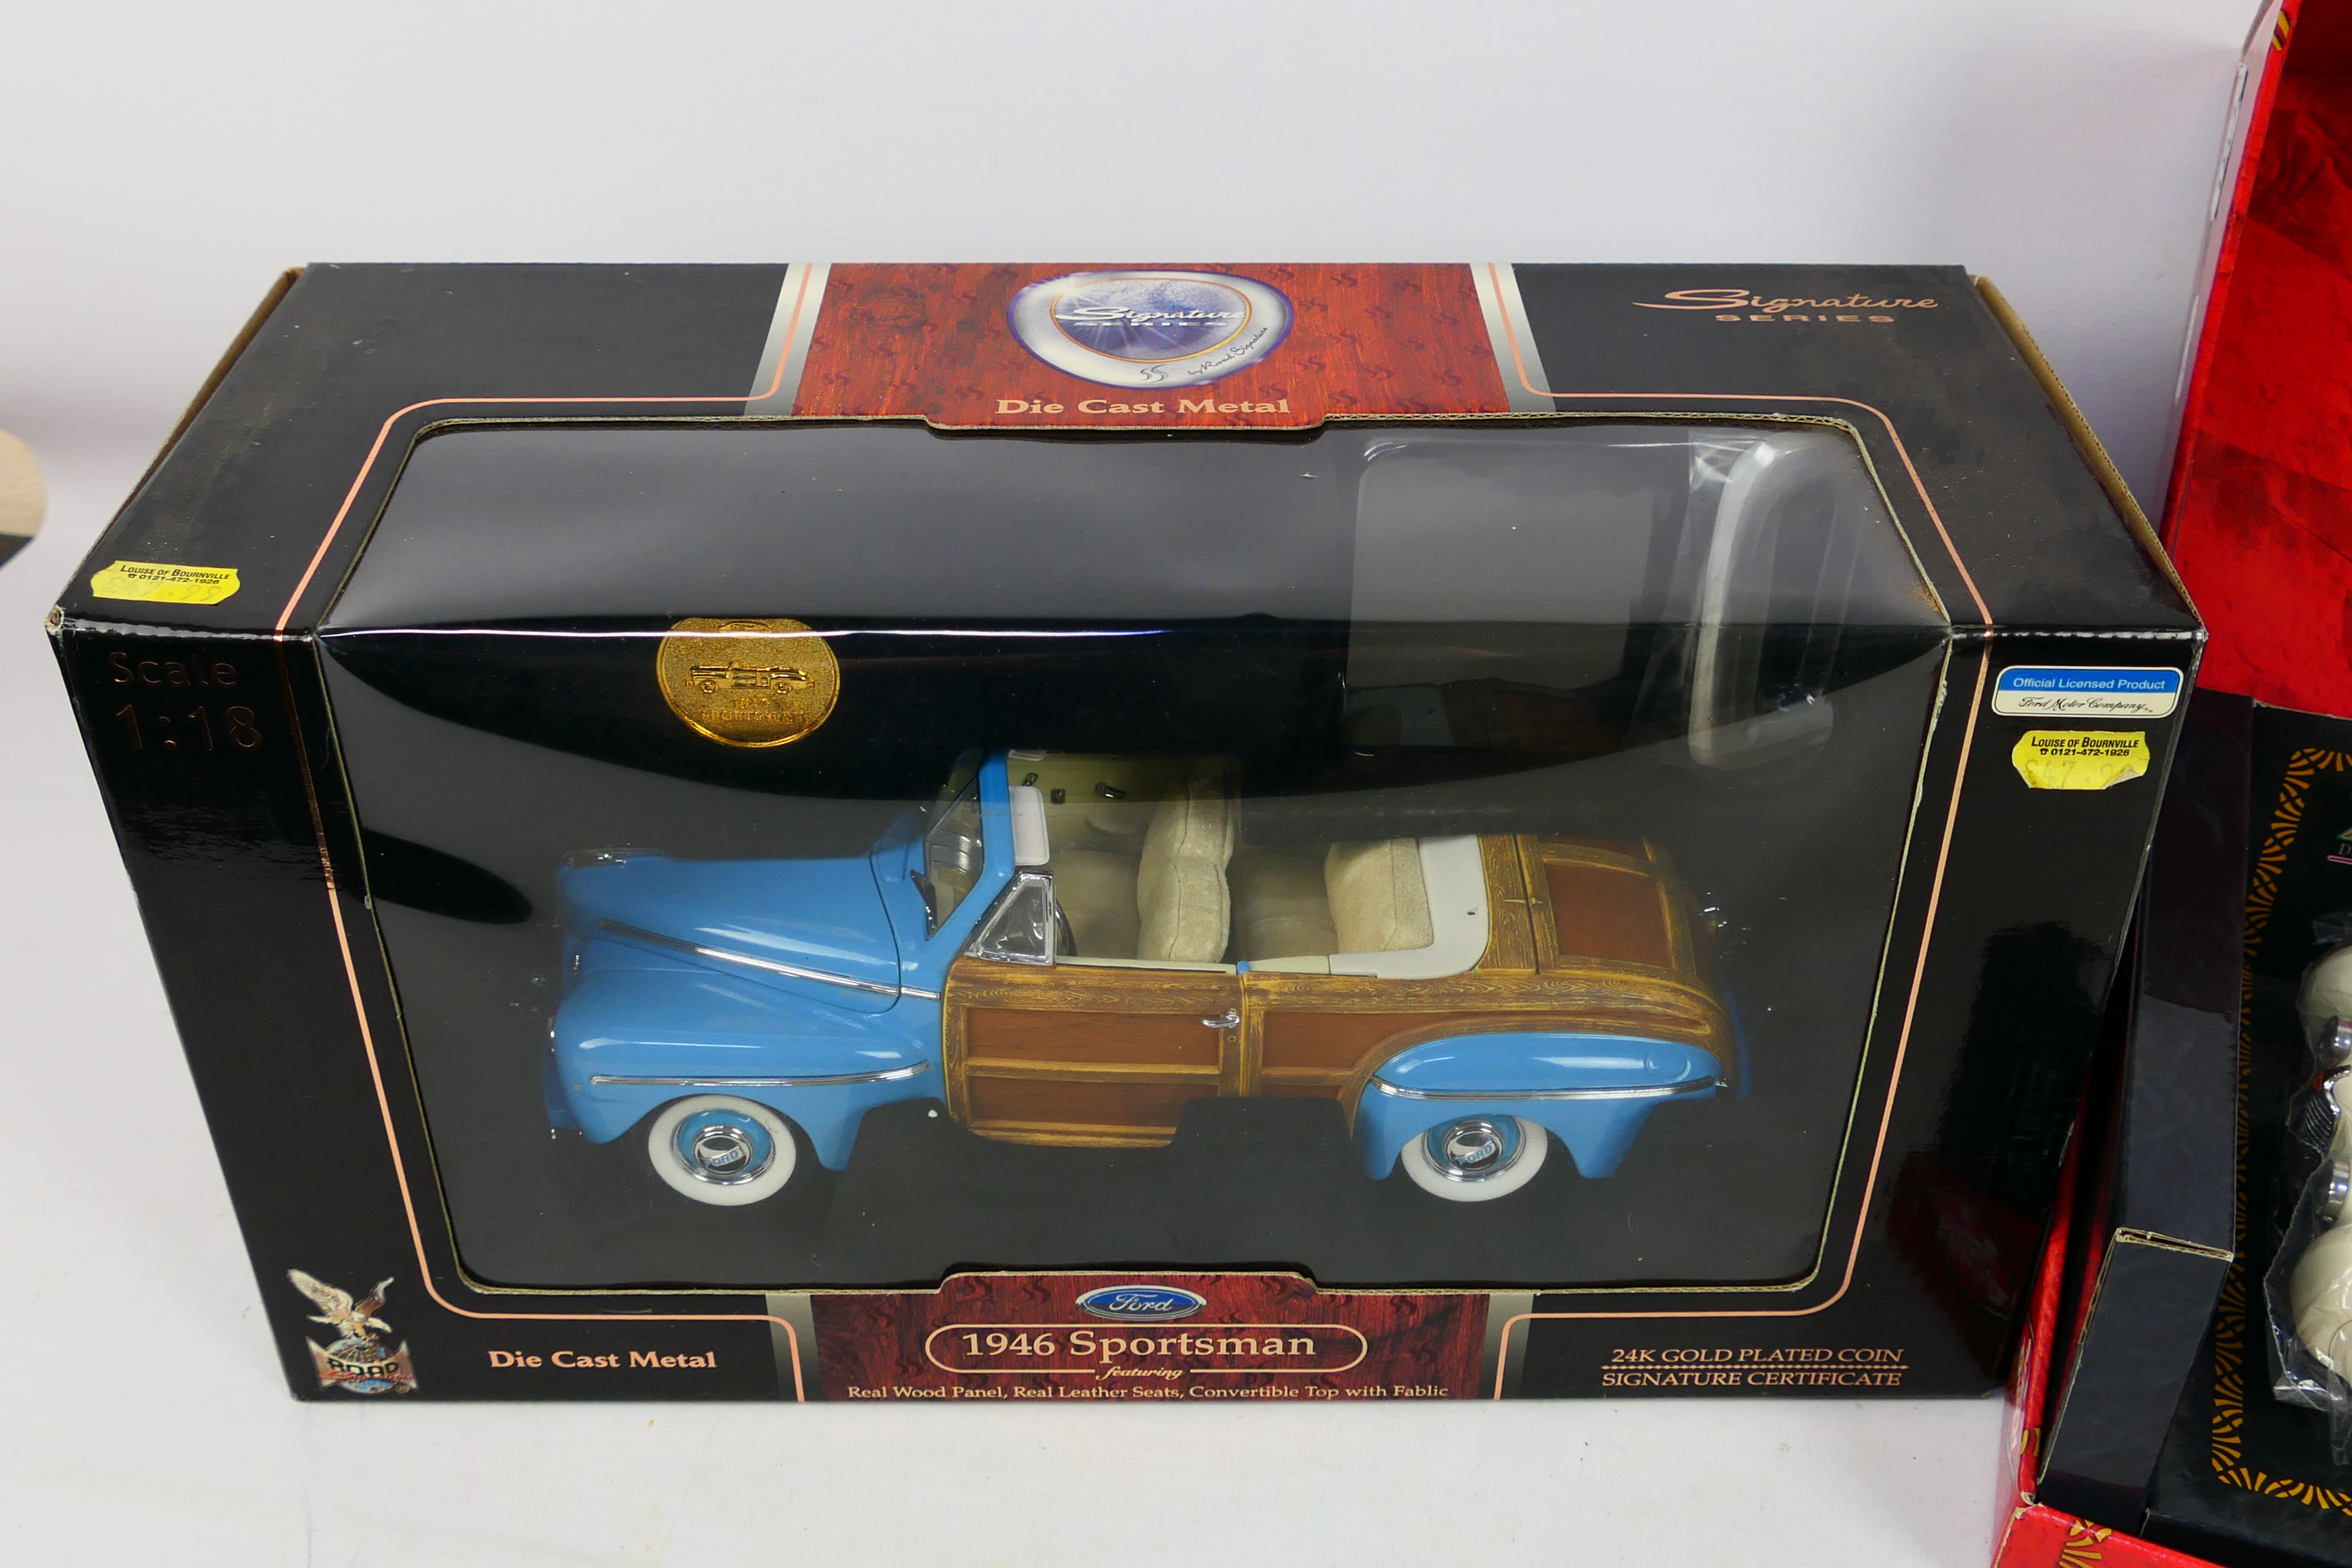 Road Signature - Guiloy - Two boxed 1:18 scale diecast model cars. - Image 4 of 7